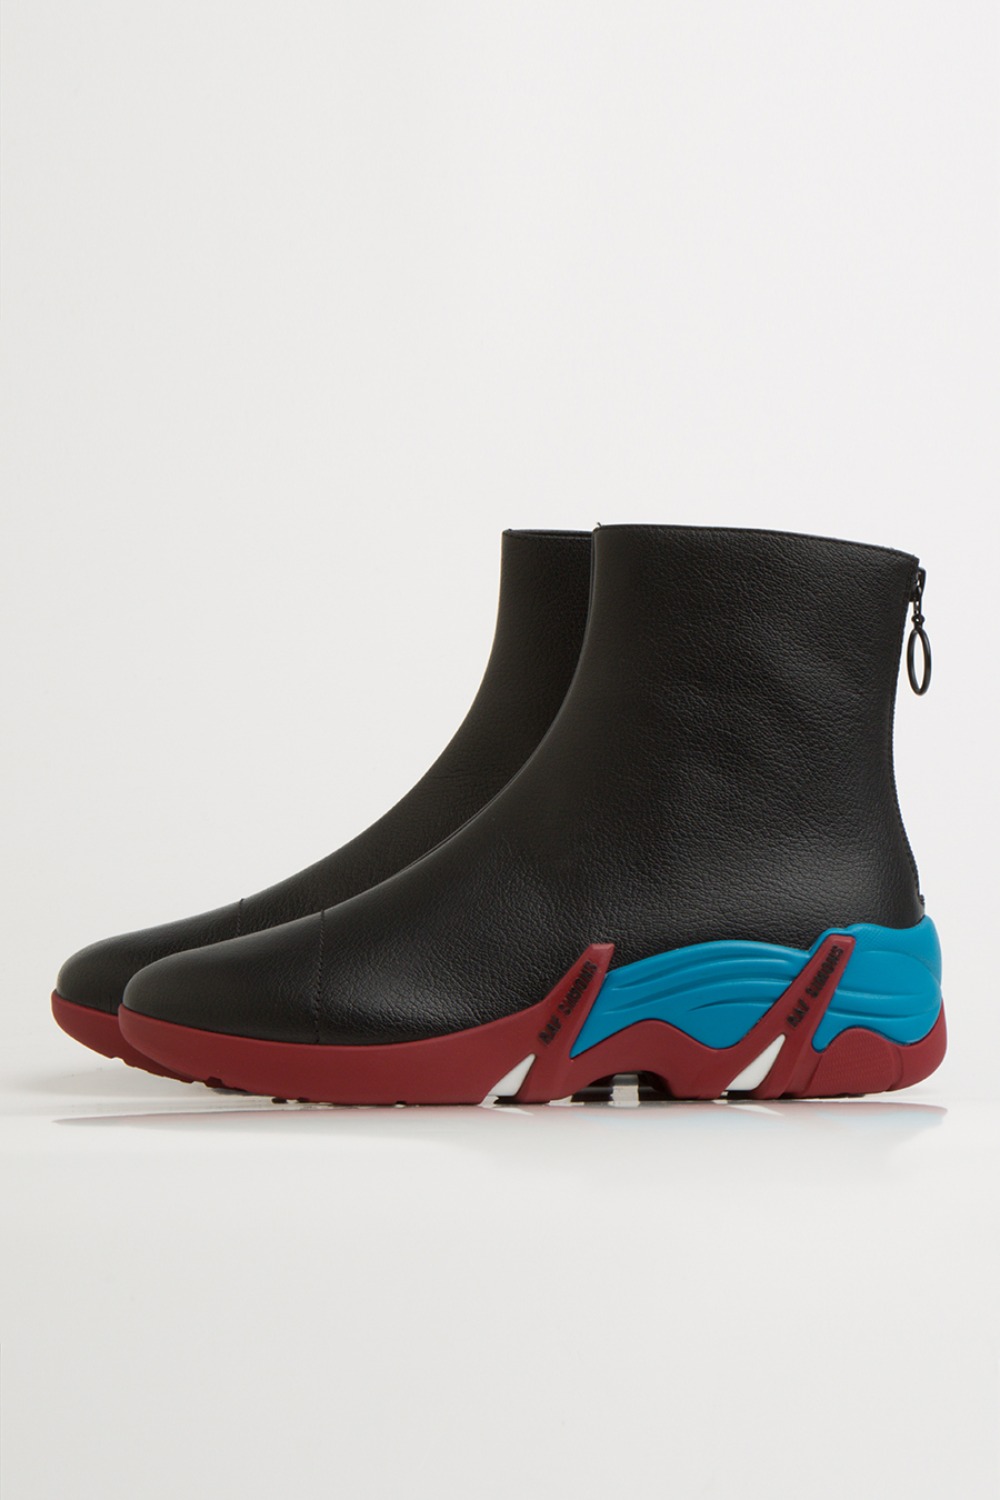 CYLON 202-986 LEATHER BLACK/BLUE/RED